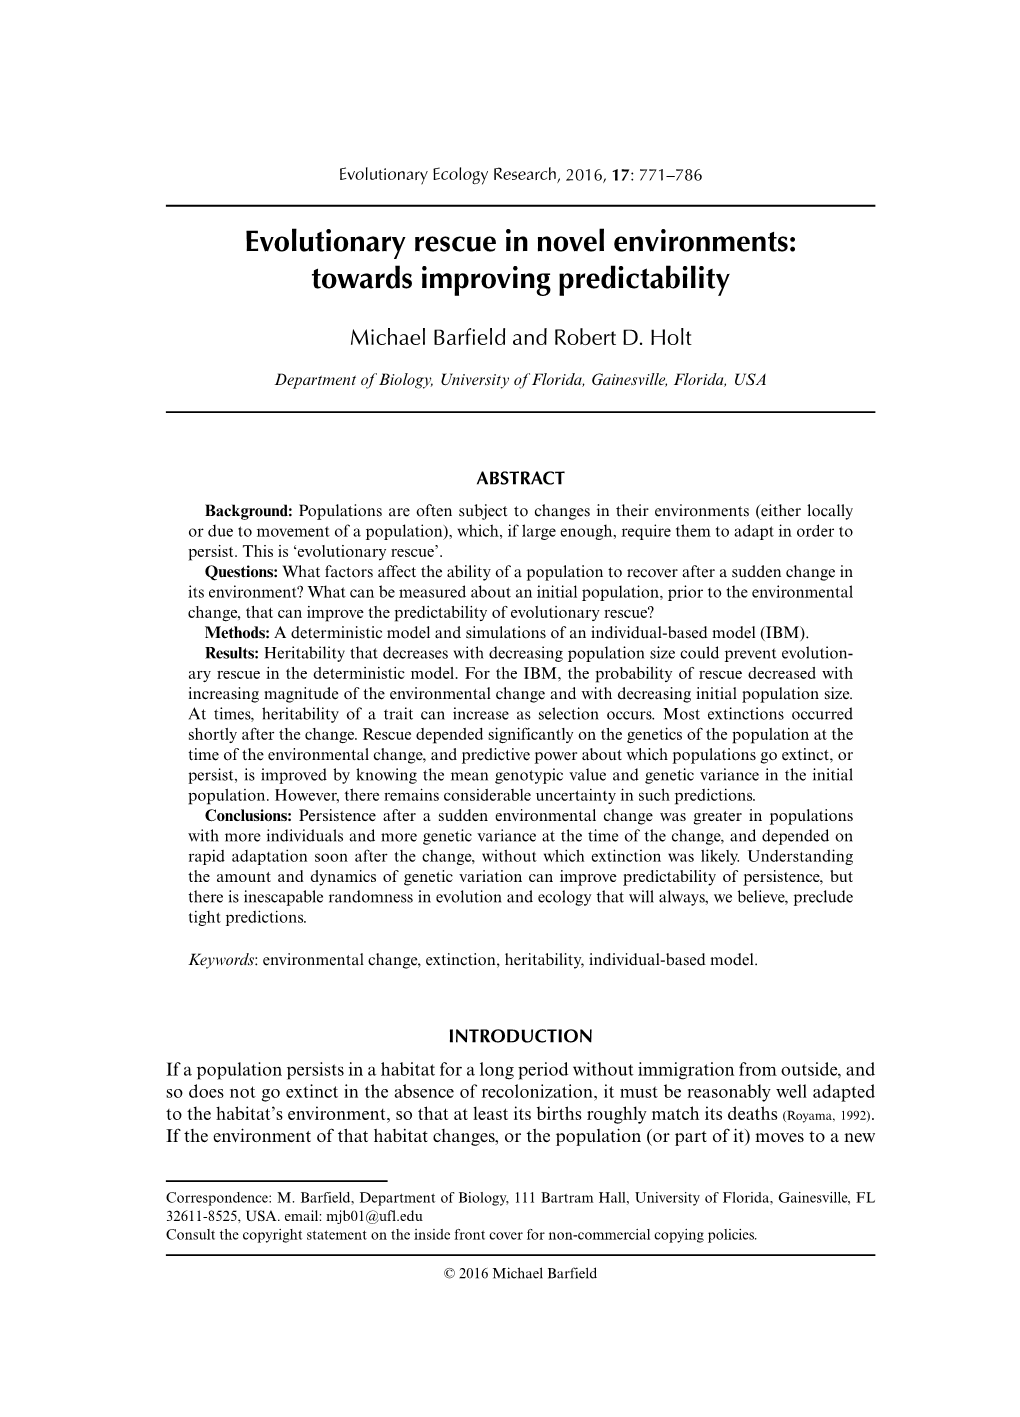 Evolutionary Rescue in Novel Environments: Towards Improving Predictability